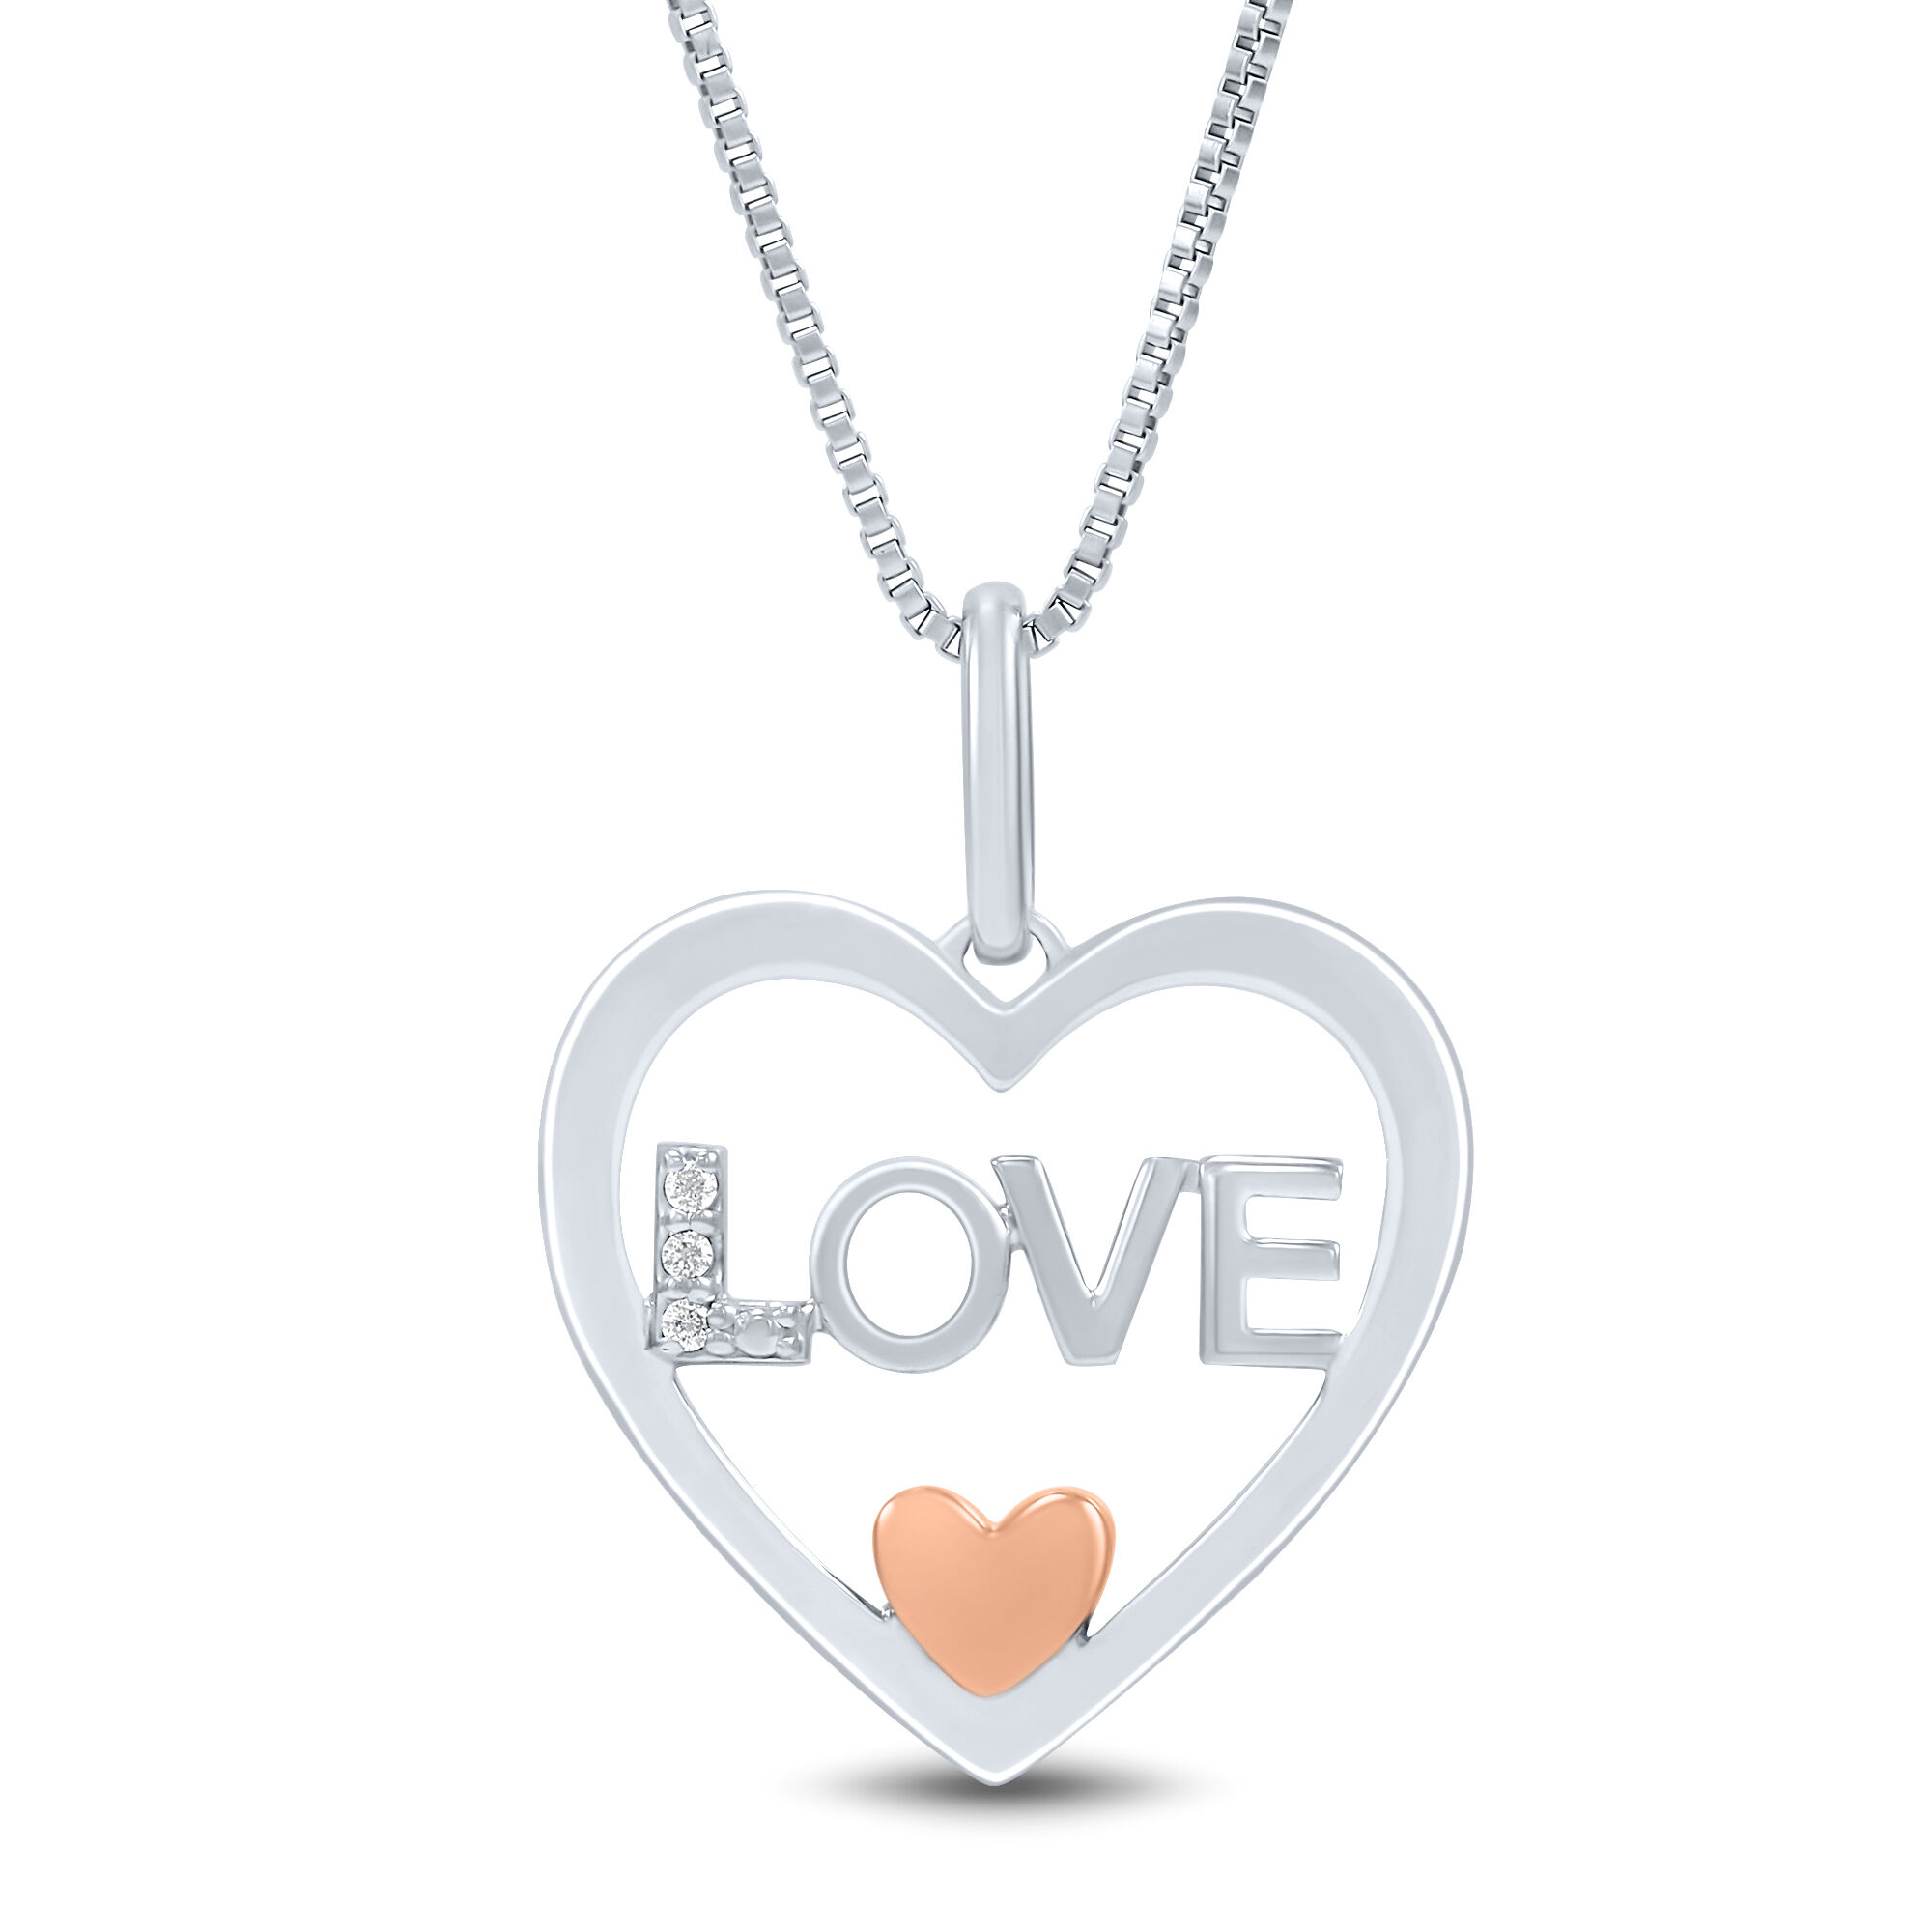 Amazon.com: Heart Pendant Necklace Gifts for Wife, Engraved 'I LOVE YOU'  Gift for Wife Girlfriend, 1 carat Moissanite D Color (VVS1) , Anniversary  Eternity Jewelry Present for Wife, Birthday Gifts for Women